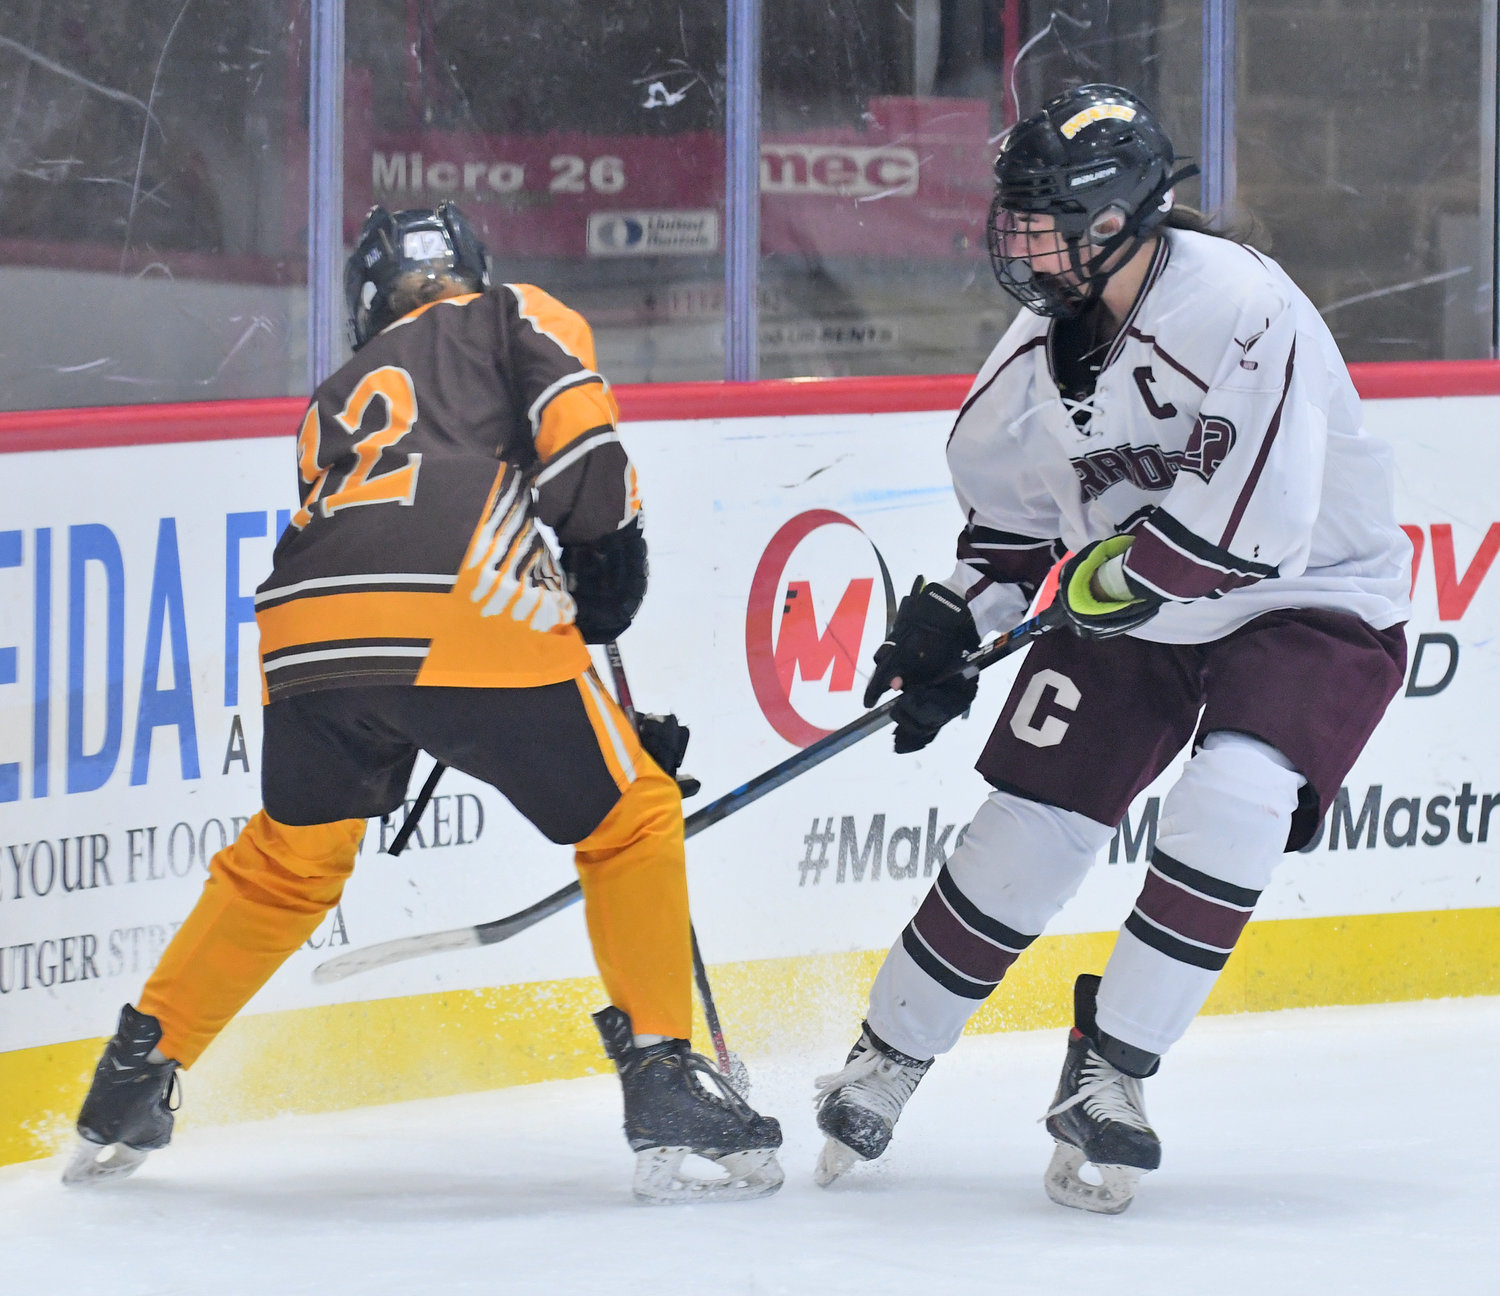 Clinton co-captain Drew Kopek, right, battles Canton’s Chloe Baxter for the puck in the corner at the Nexus Center in Utica Monday ngiht. Kopek scored the eventual game-winning goal in the second period to break a 1-1 tie. Kopek also had an assist on the team’s other goal in a 2-1 win.